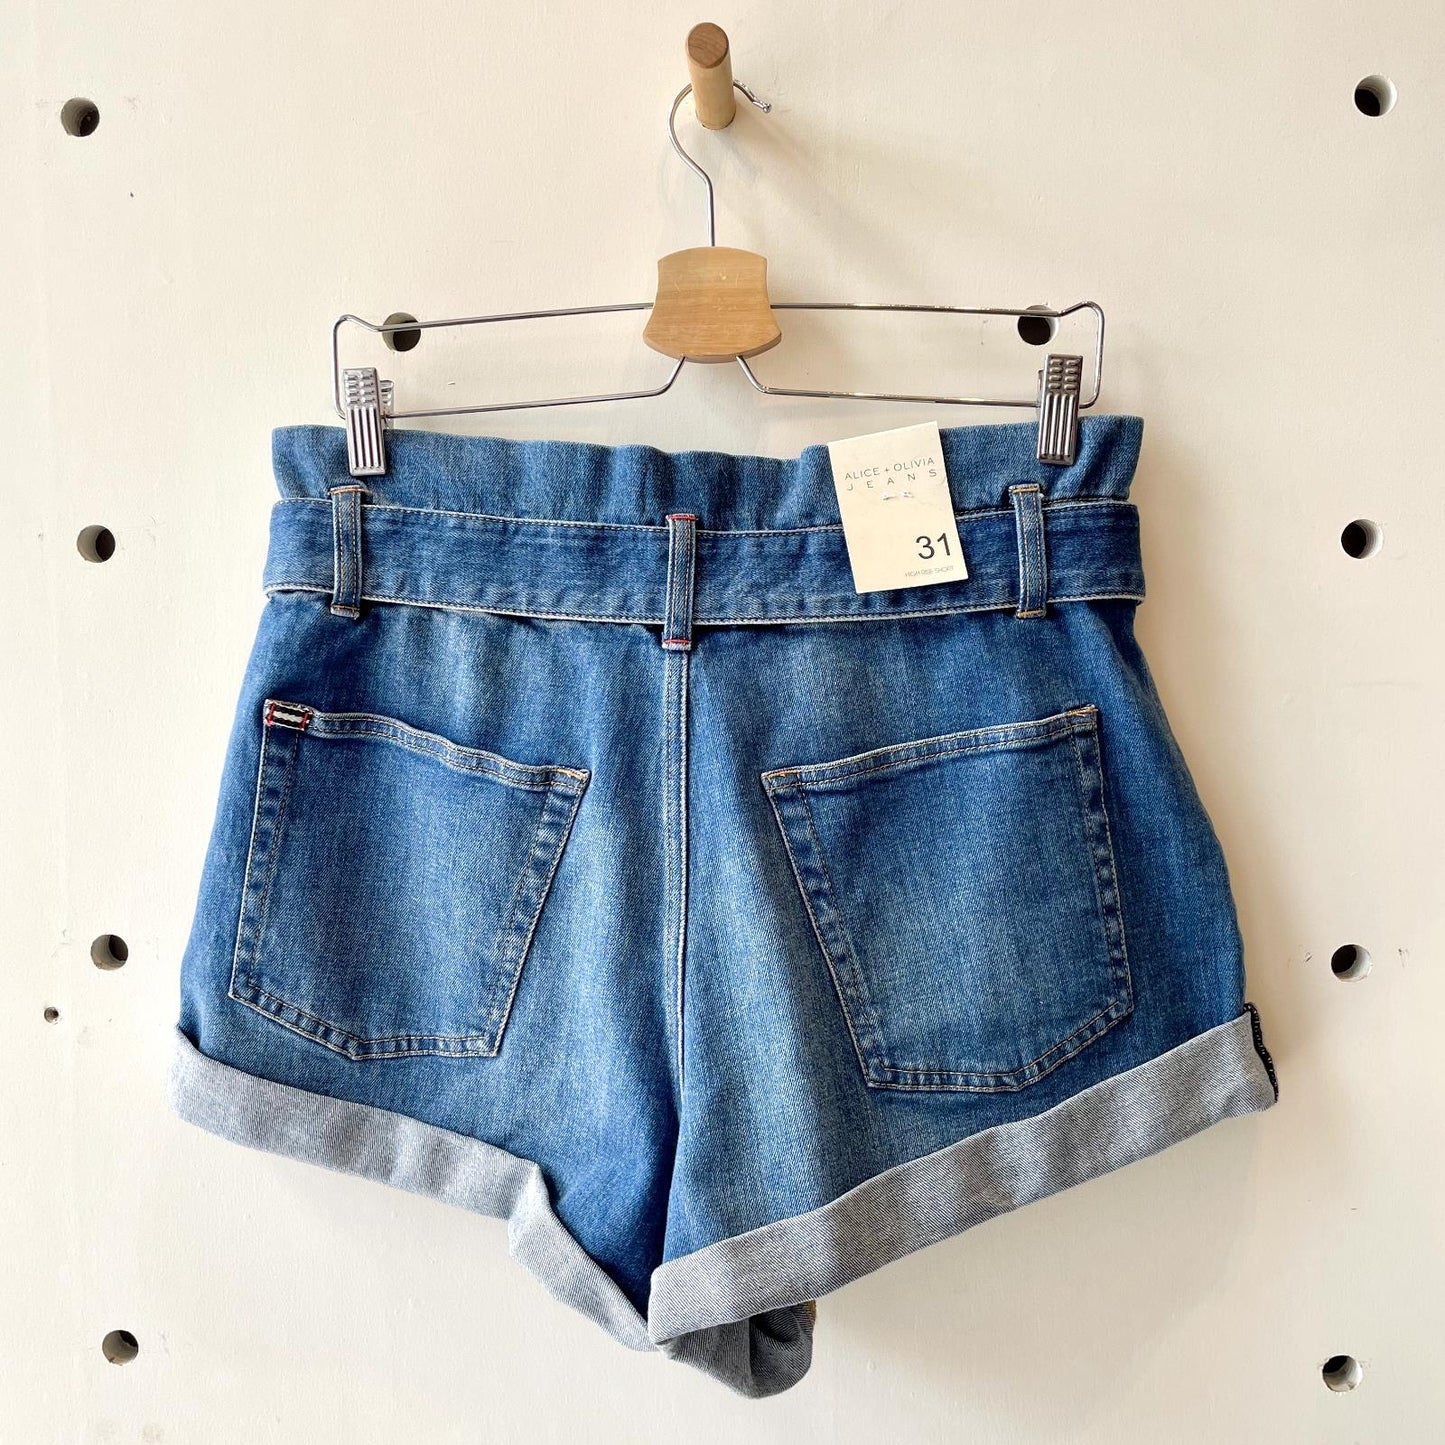 31 - Alice + Olivia High Waisted Denim Rosemary Paperbag Jean Shorts NEW 0716MD